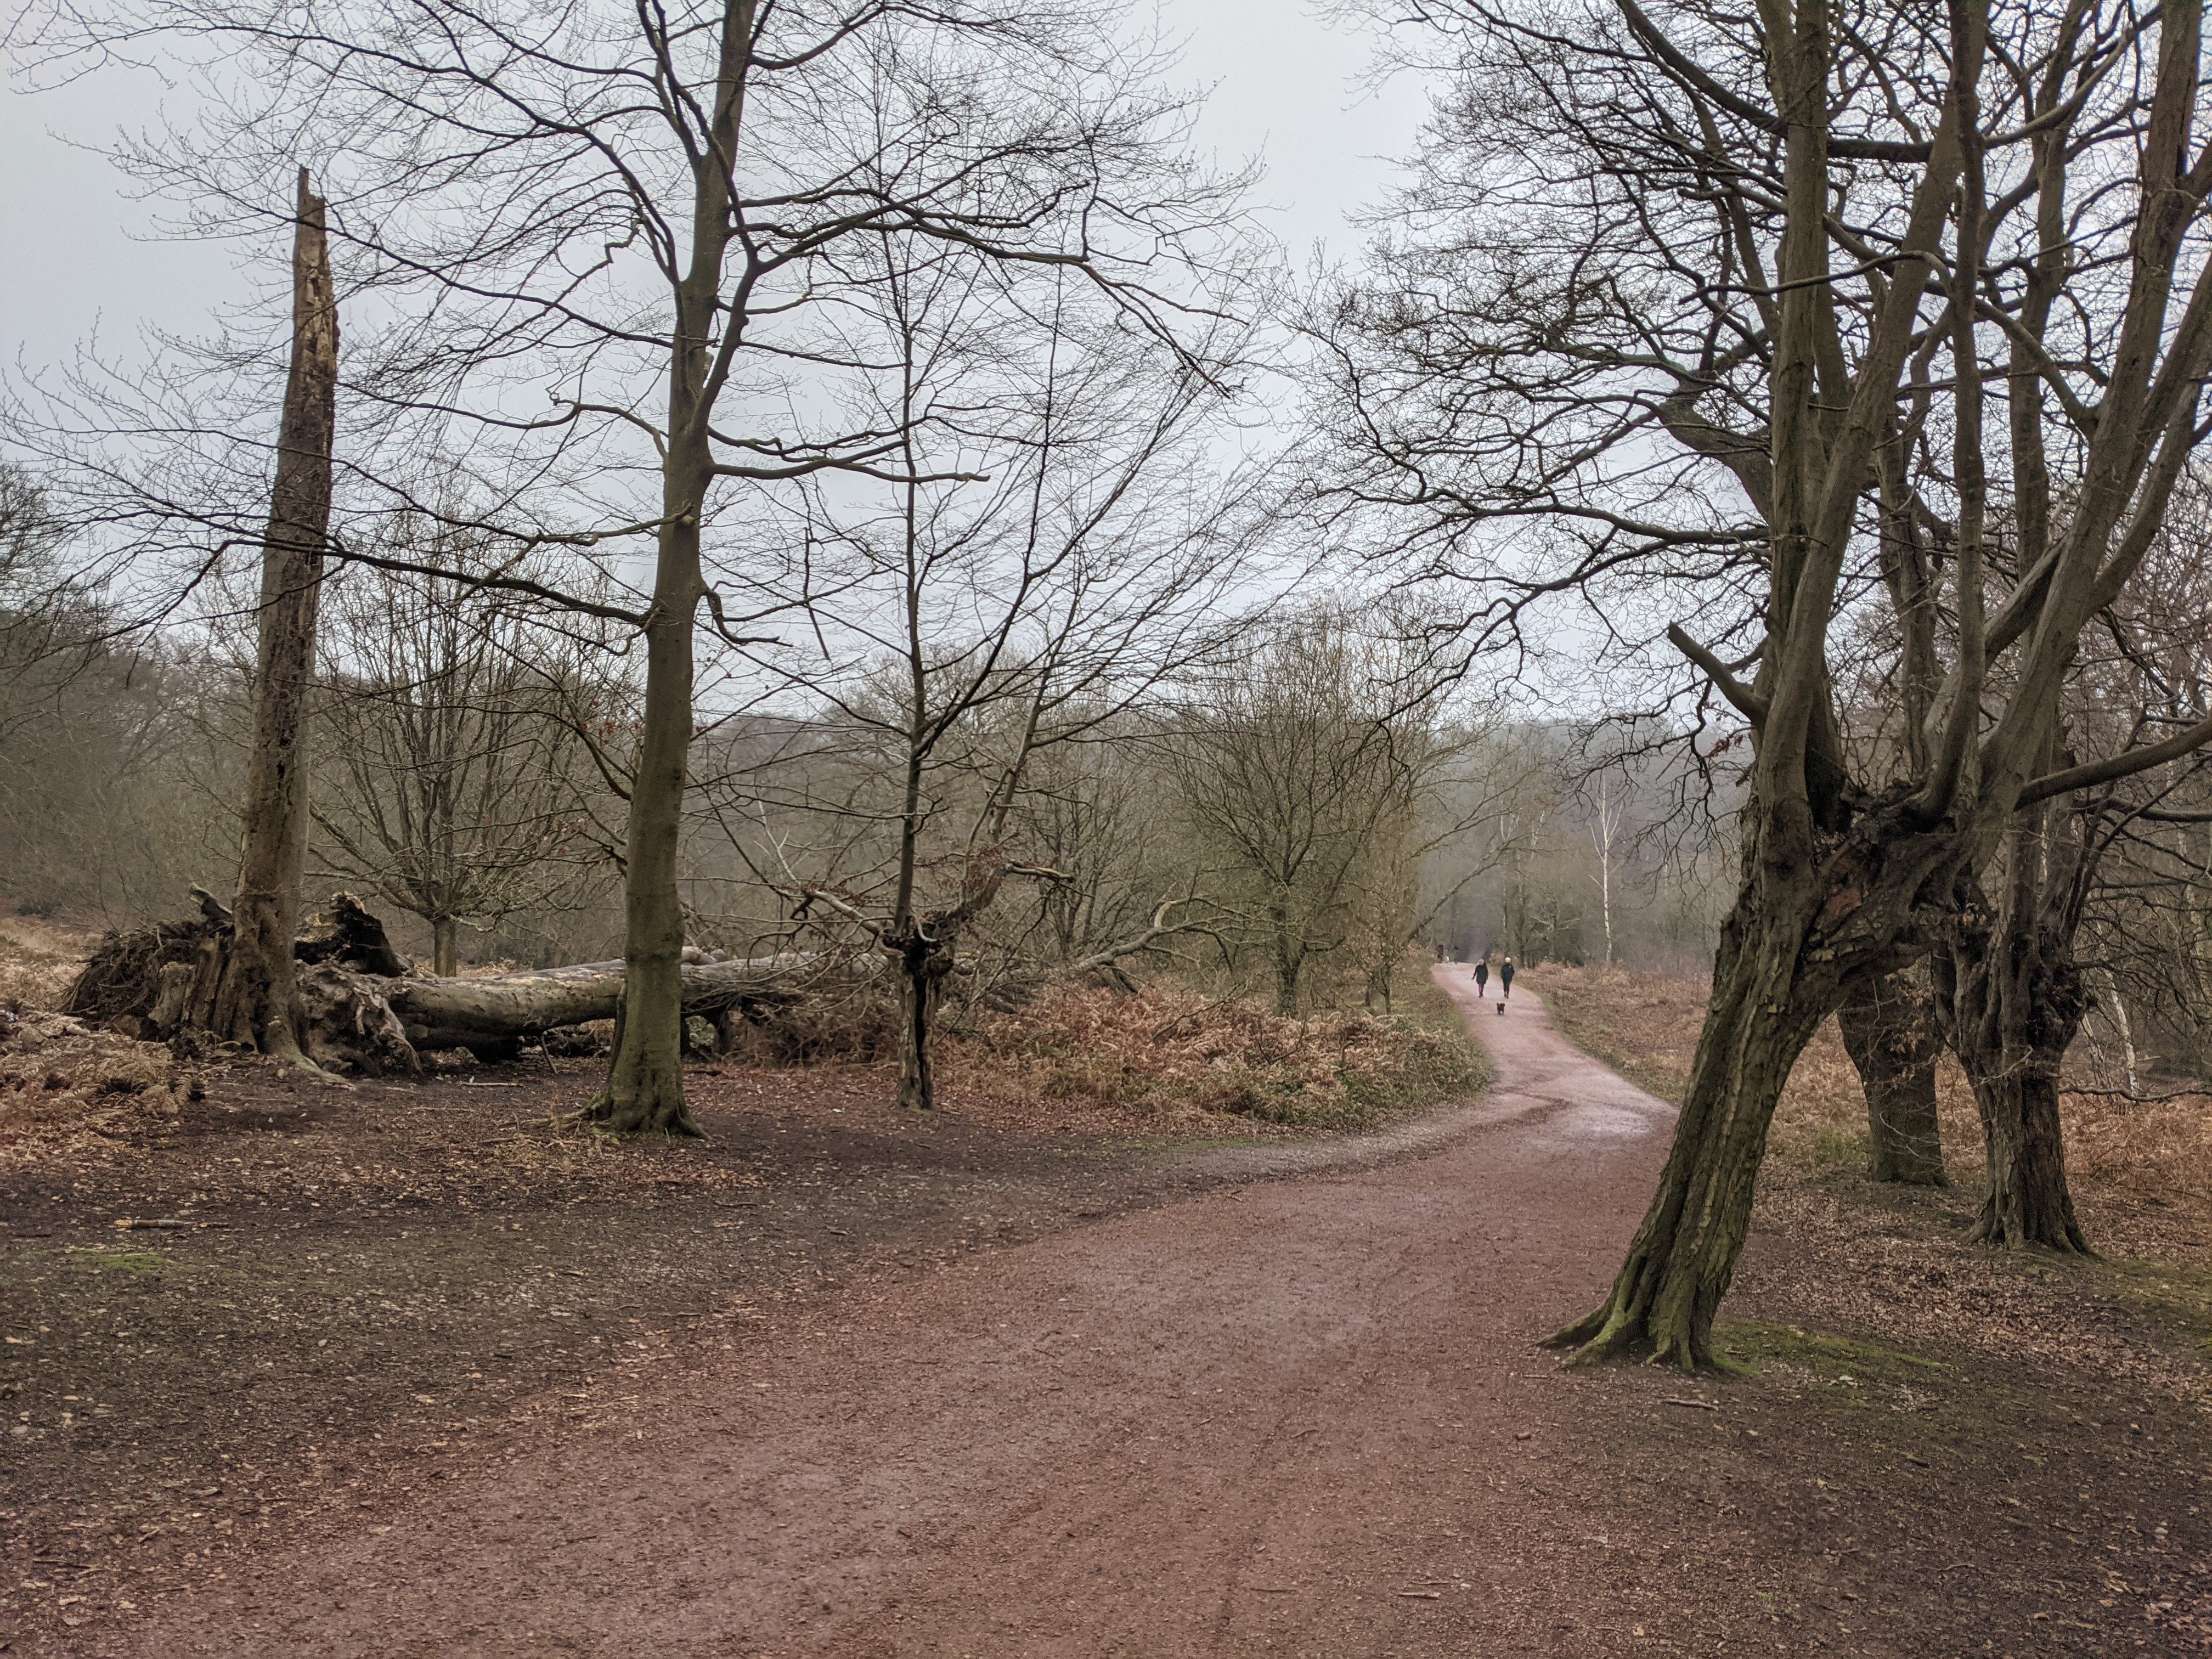 Epping Forest offers a huge network of trails to explore